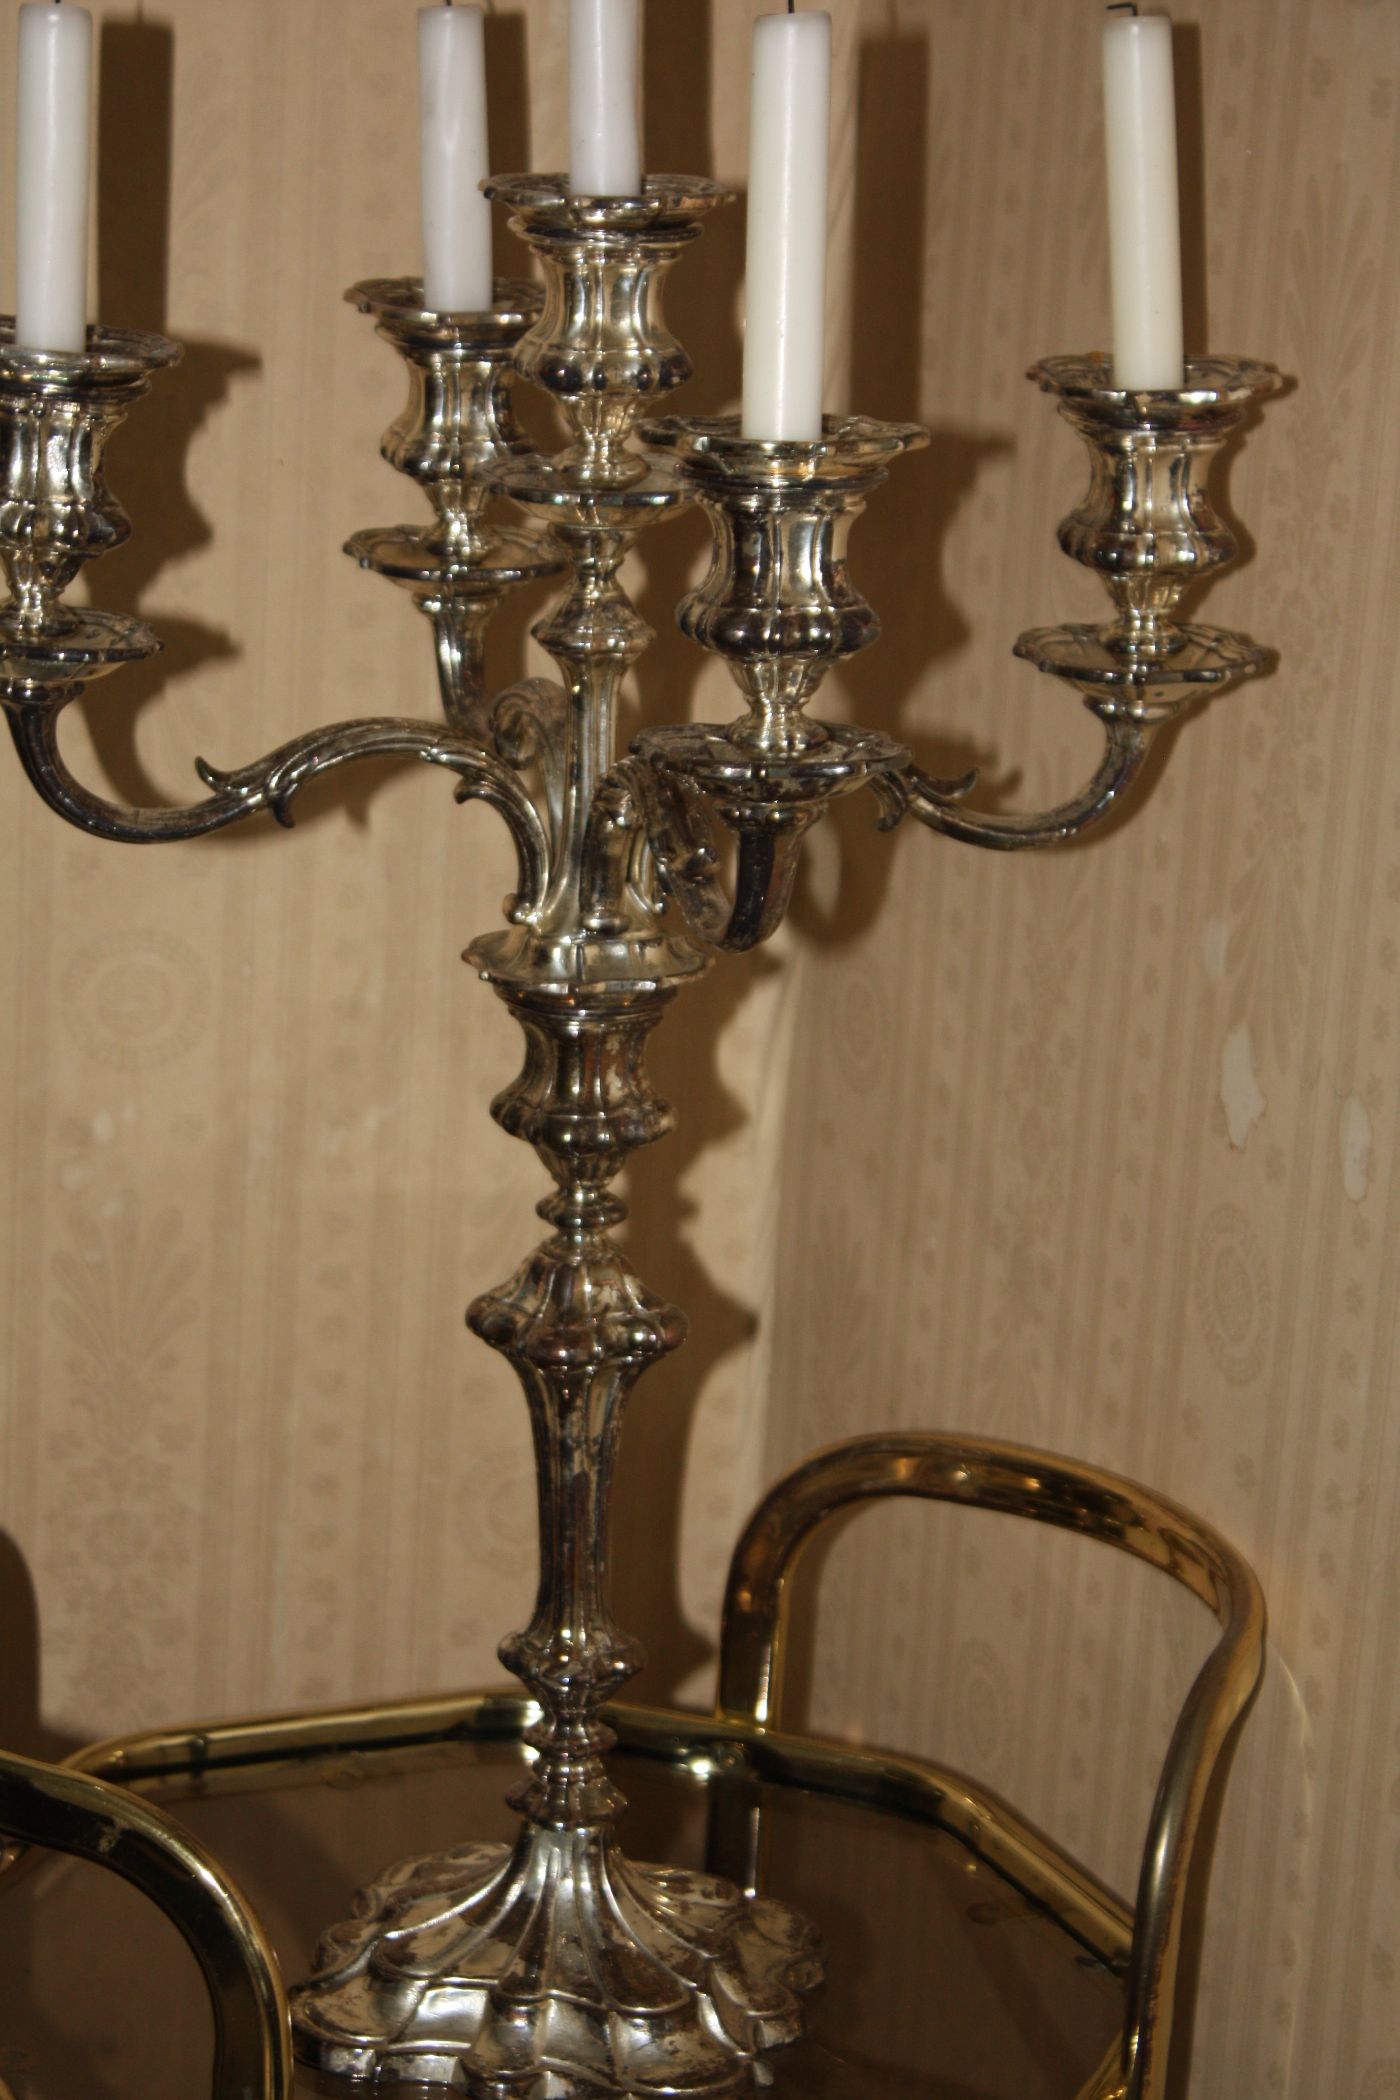 A heavy bronze gold-plated 5-arms candle holder by Valenti, Spain, Height: 23.62'' (60 cm)